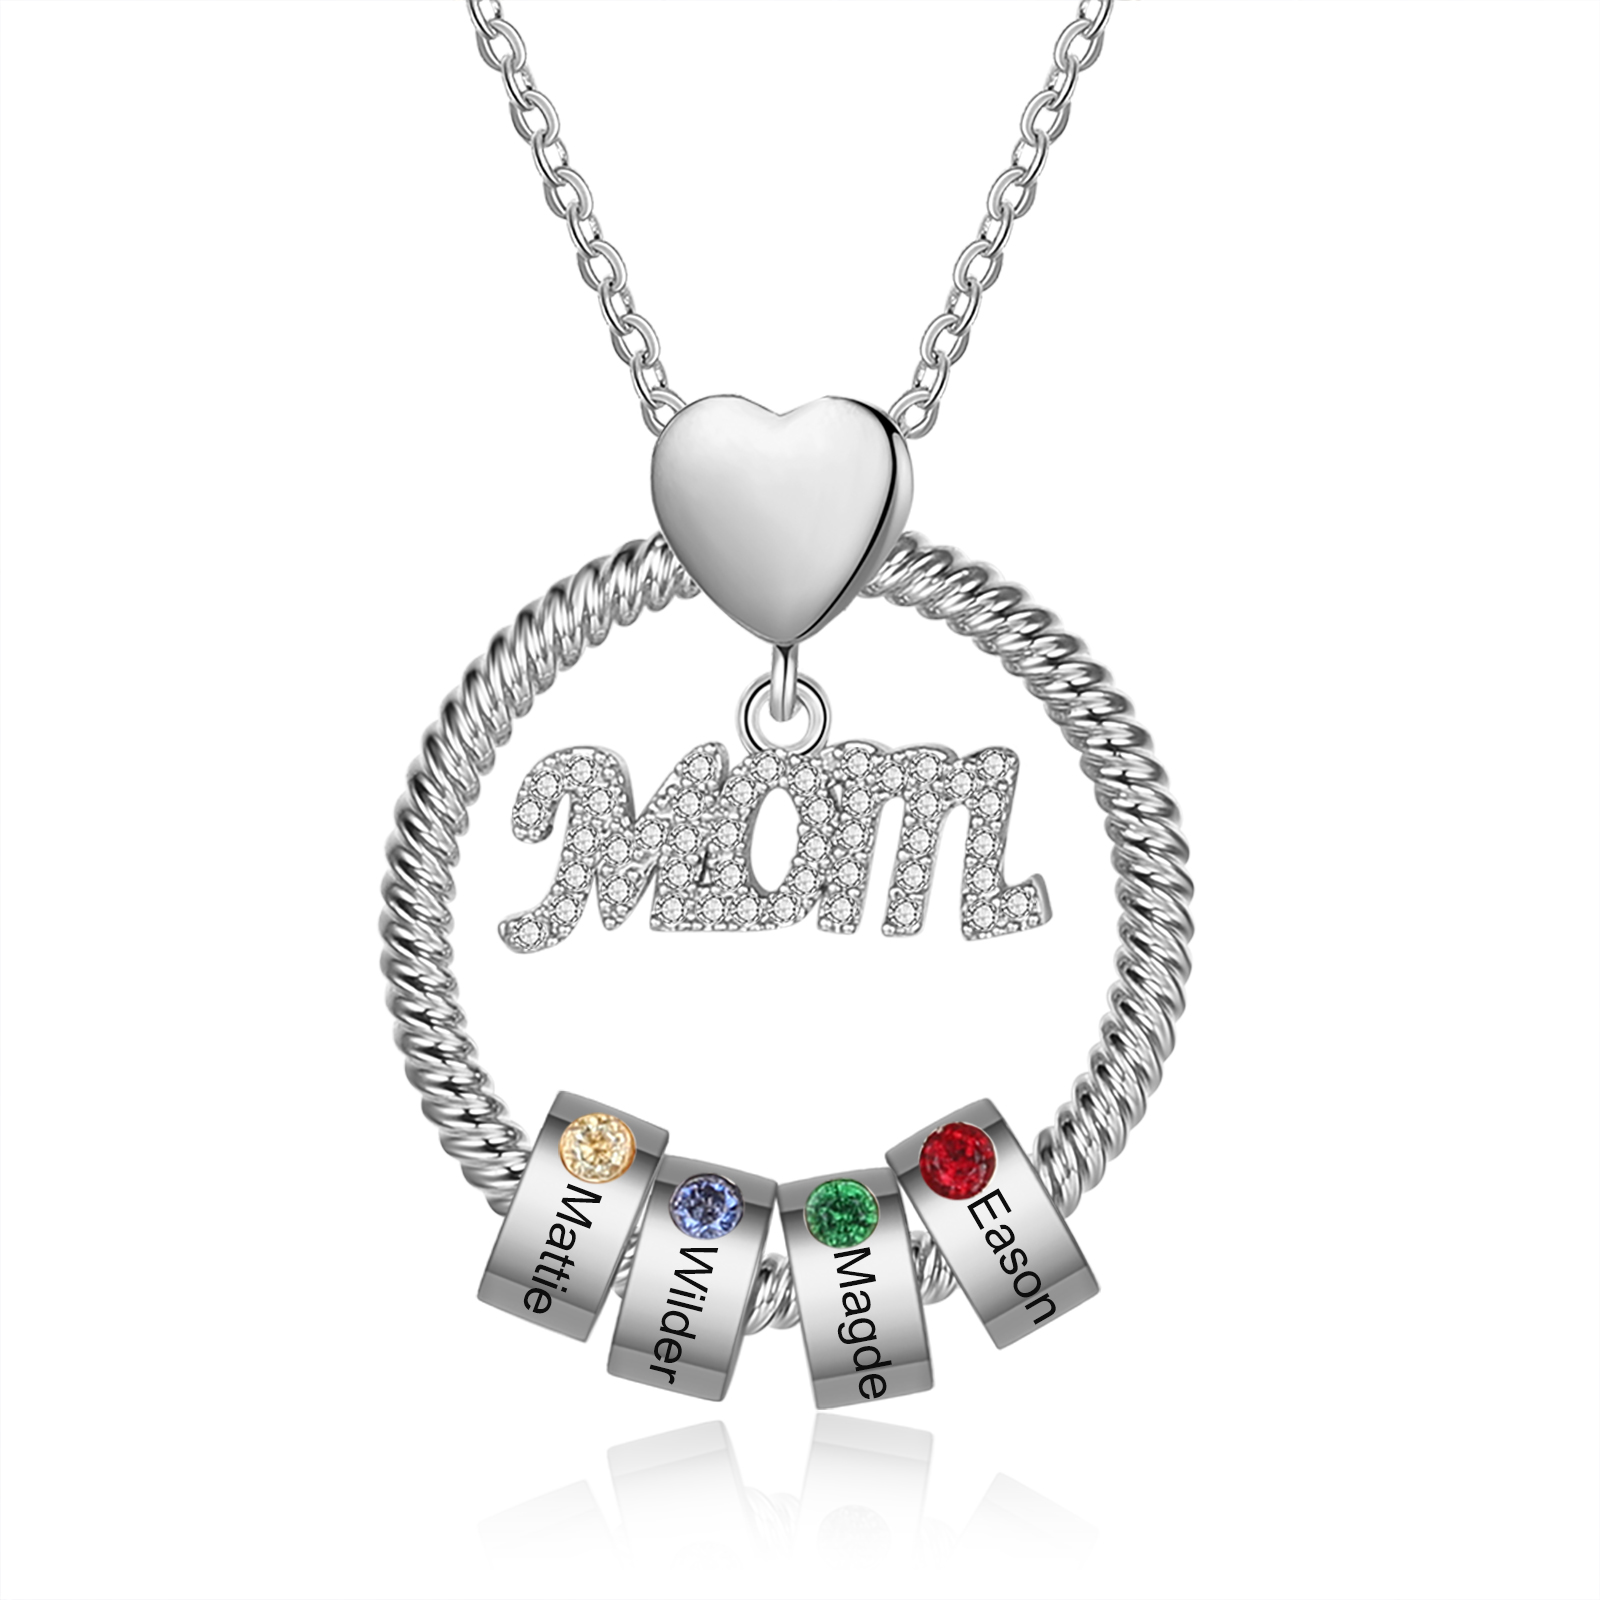 4 Names-Personalized Necklace With 4 Birthstones Engraved Names Gift For Mother